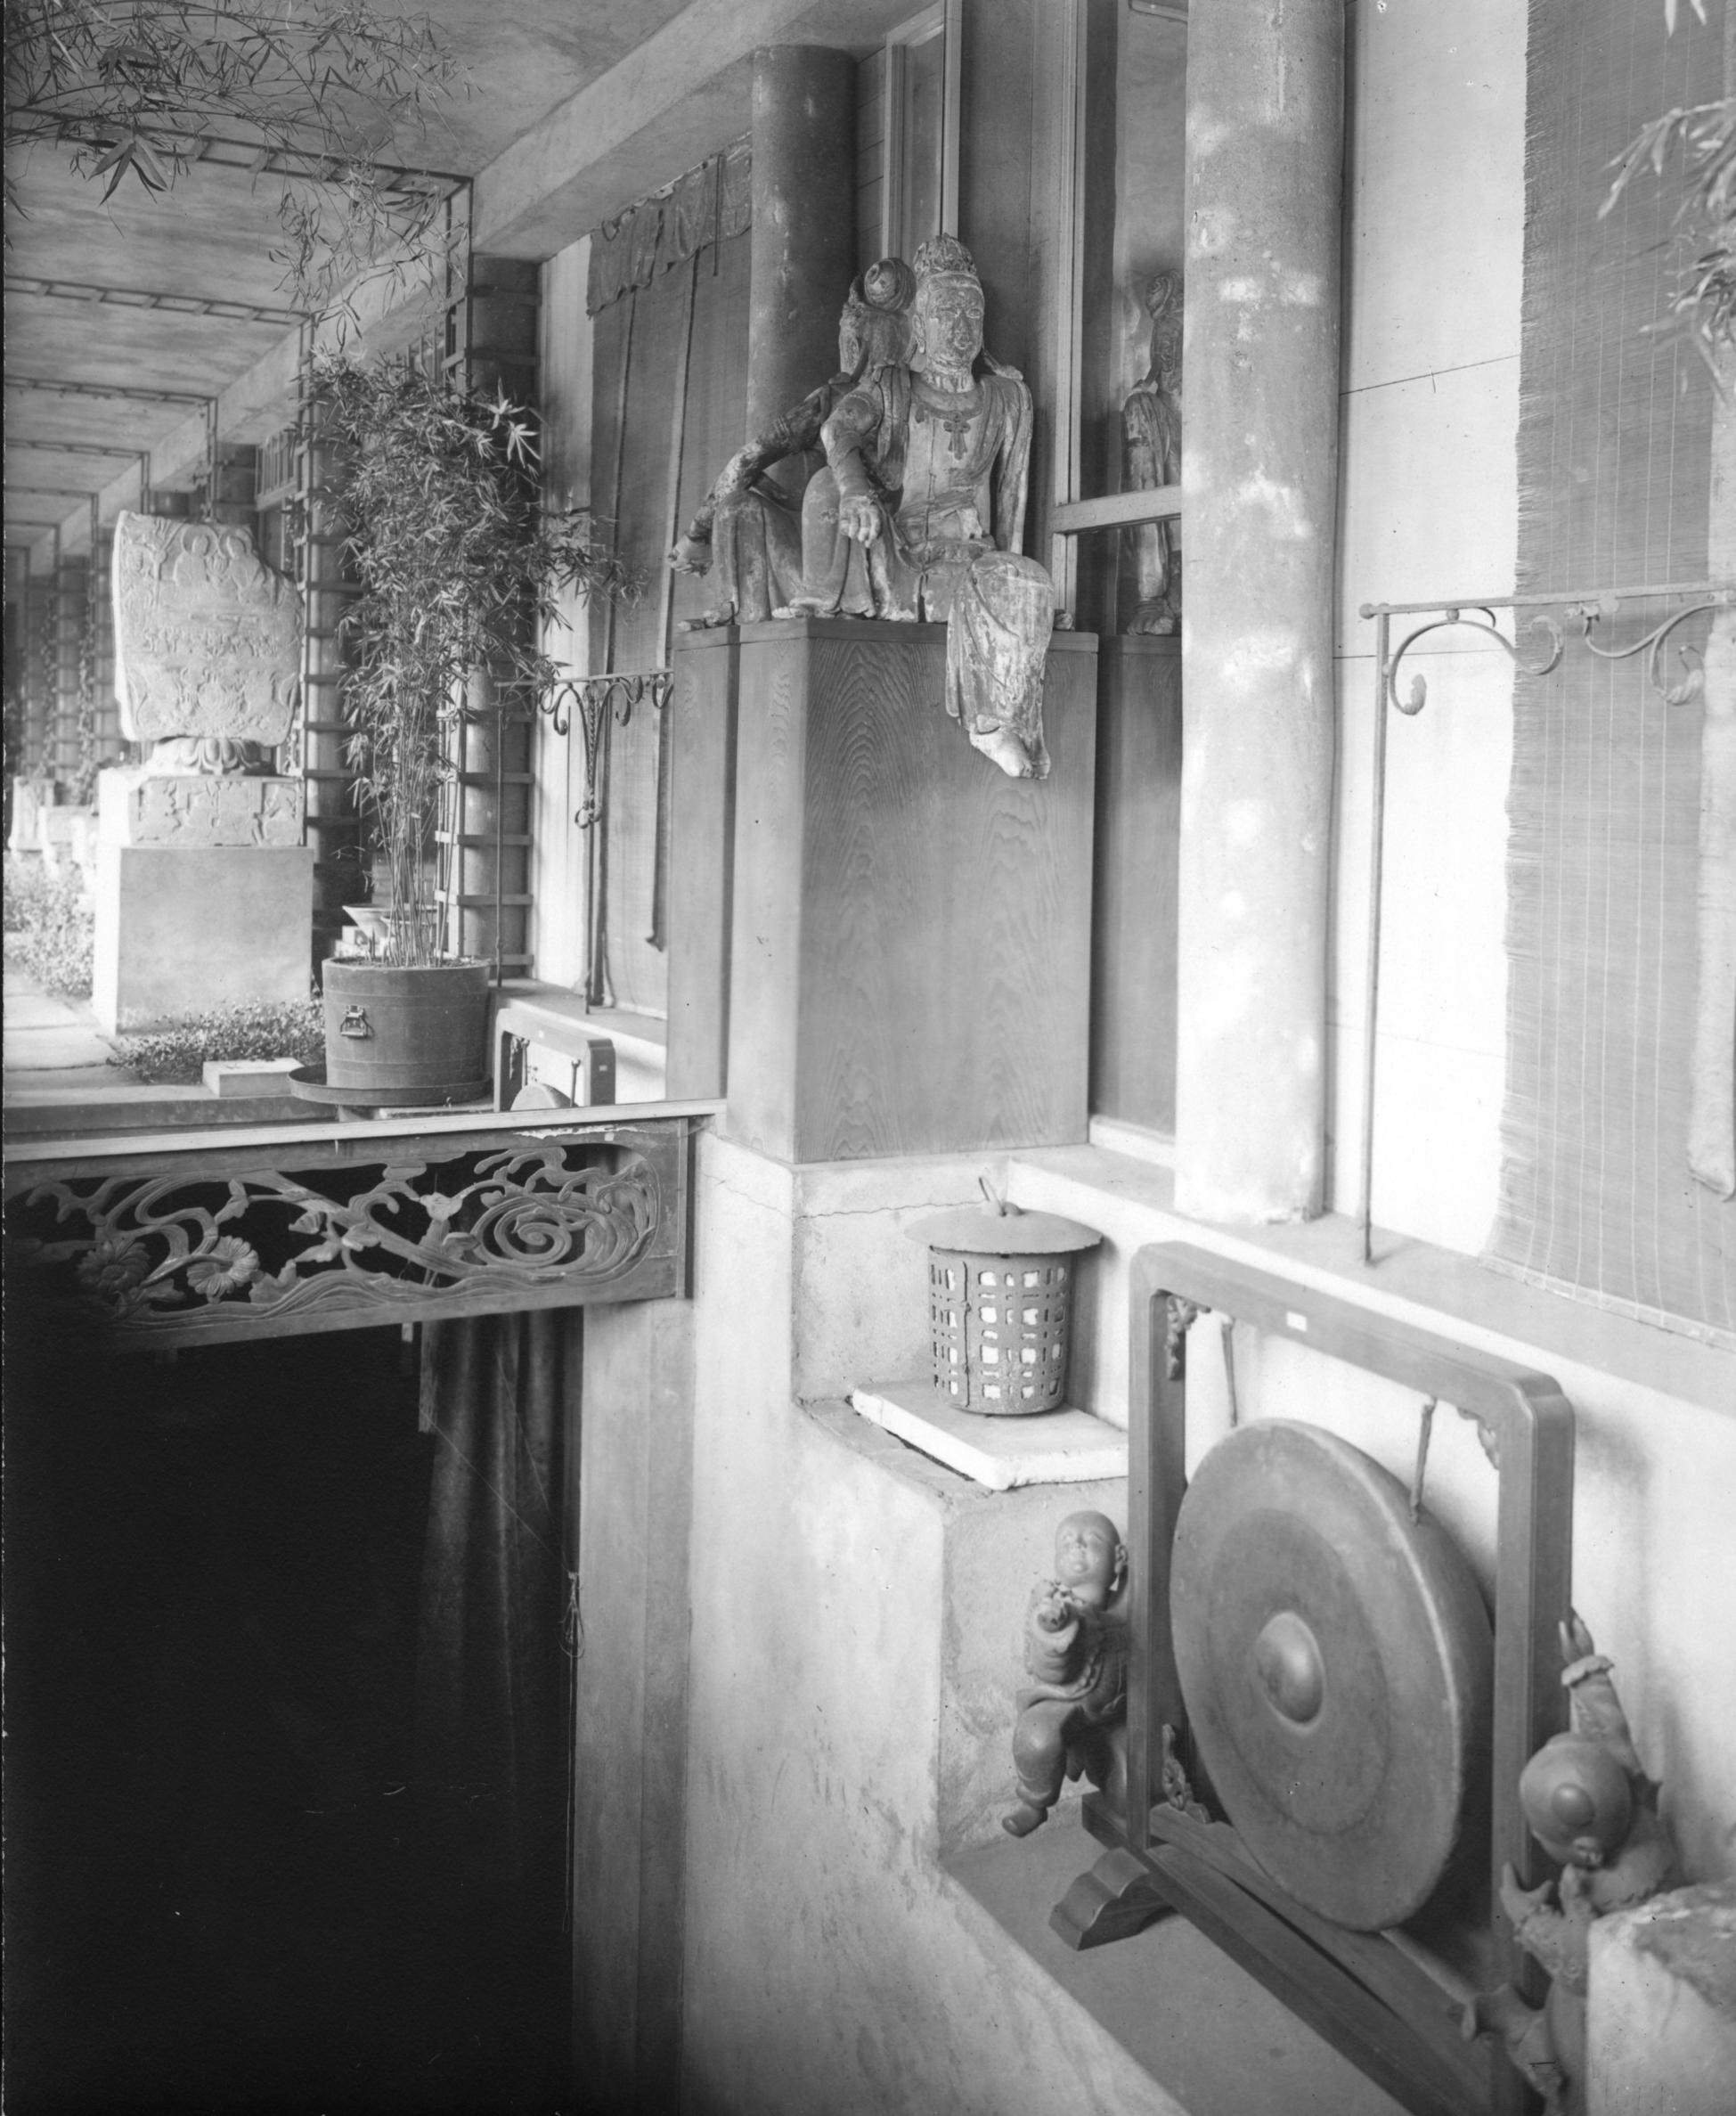 South-facing view of Chinese Loggia gallery from 1926 with the Guanyin sculpture prominently displayed above a staircase that is surrounded by Asian art.